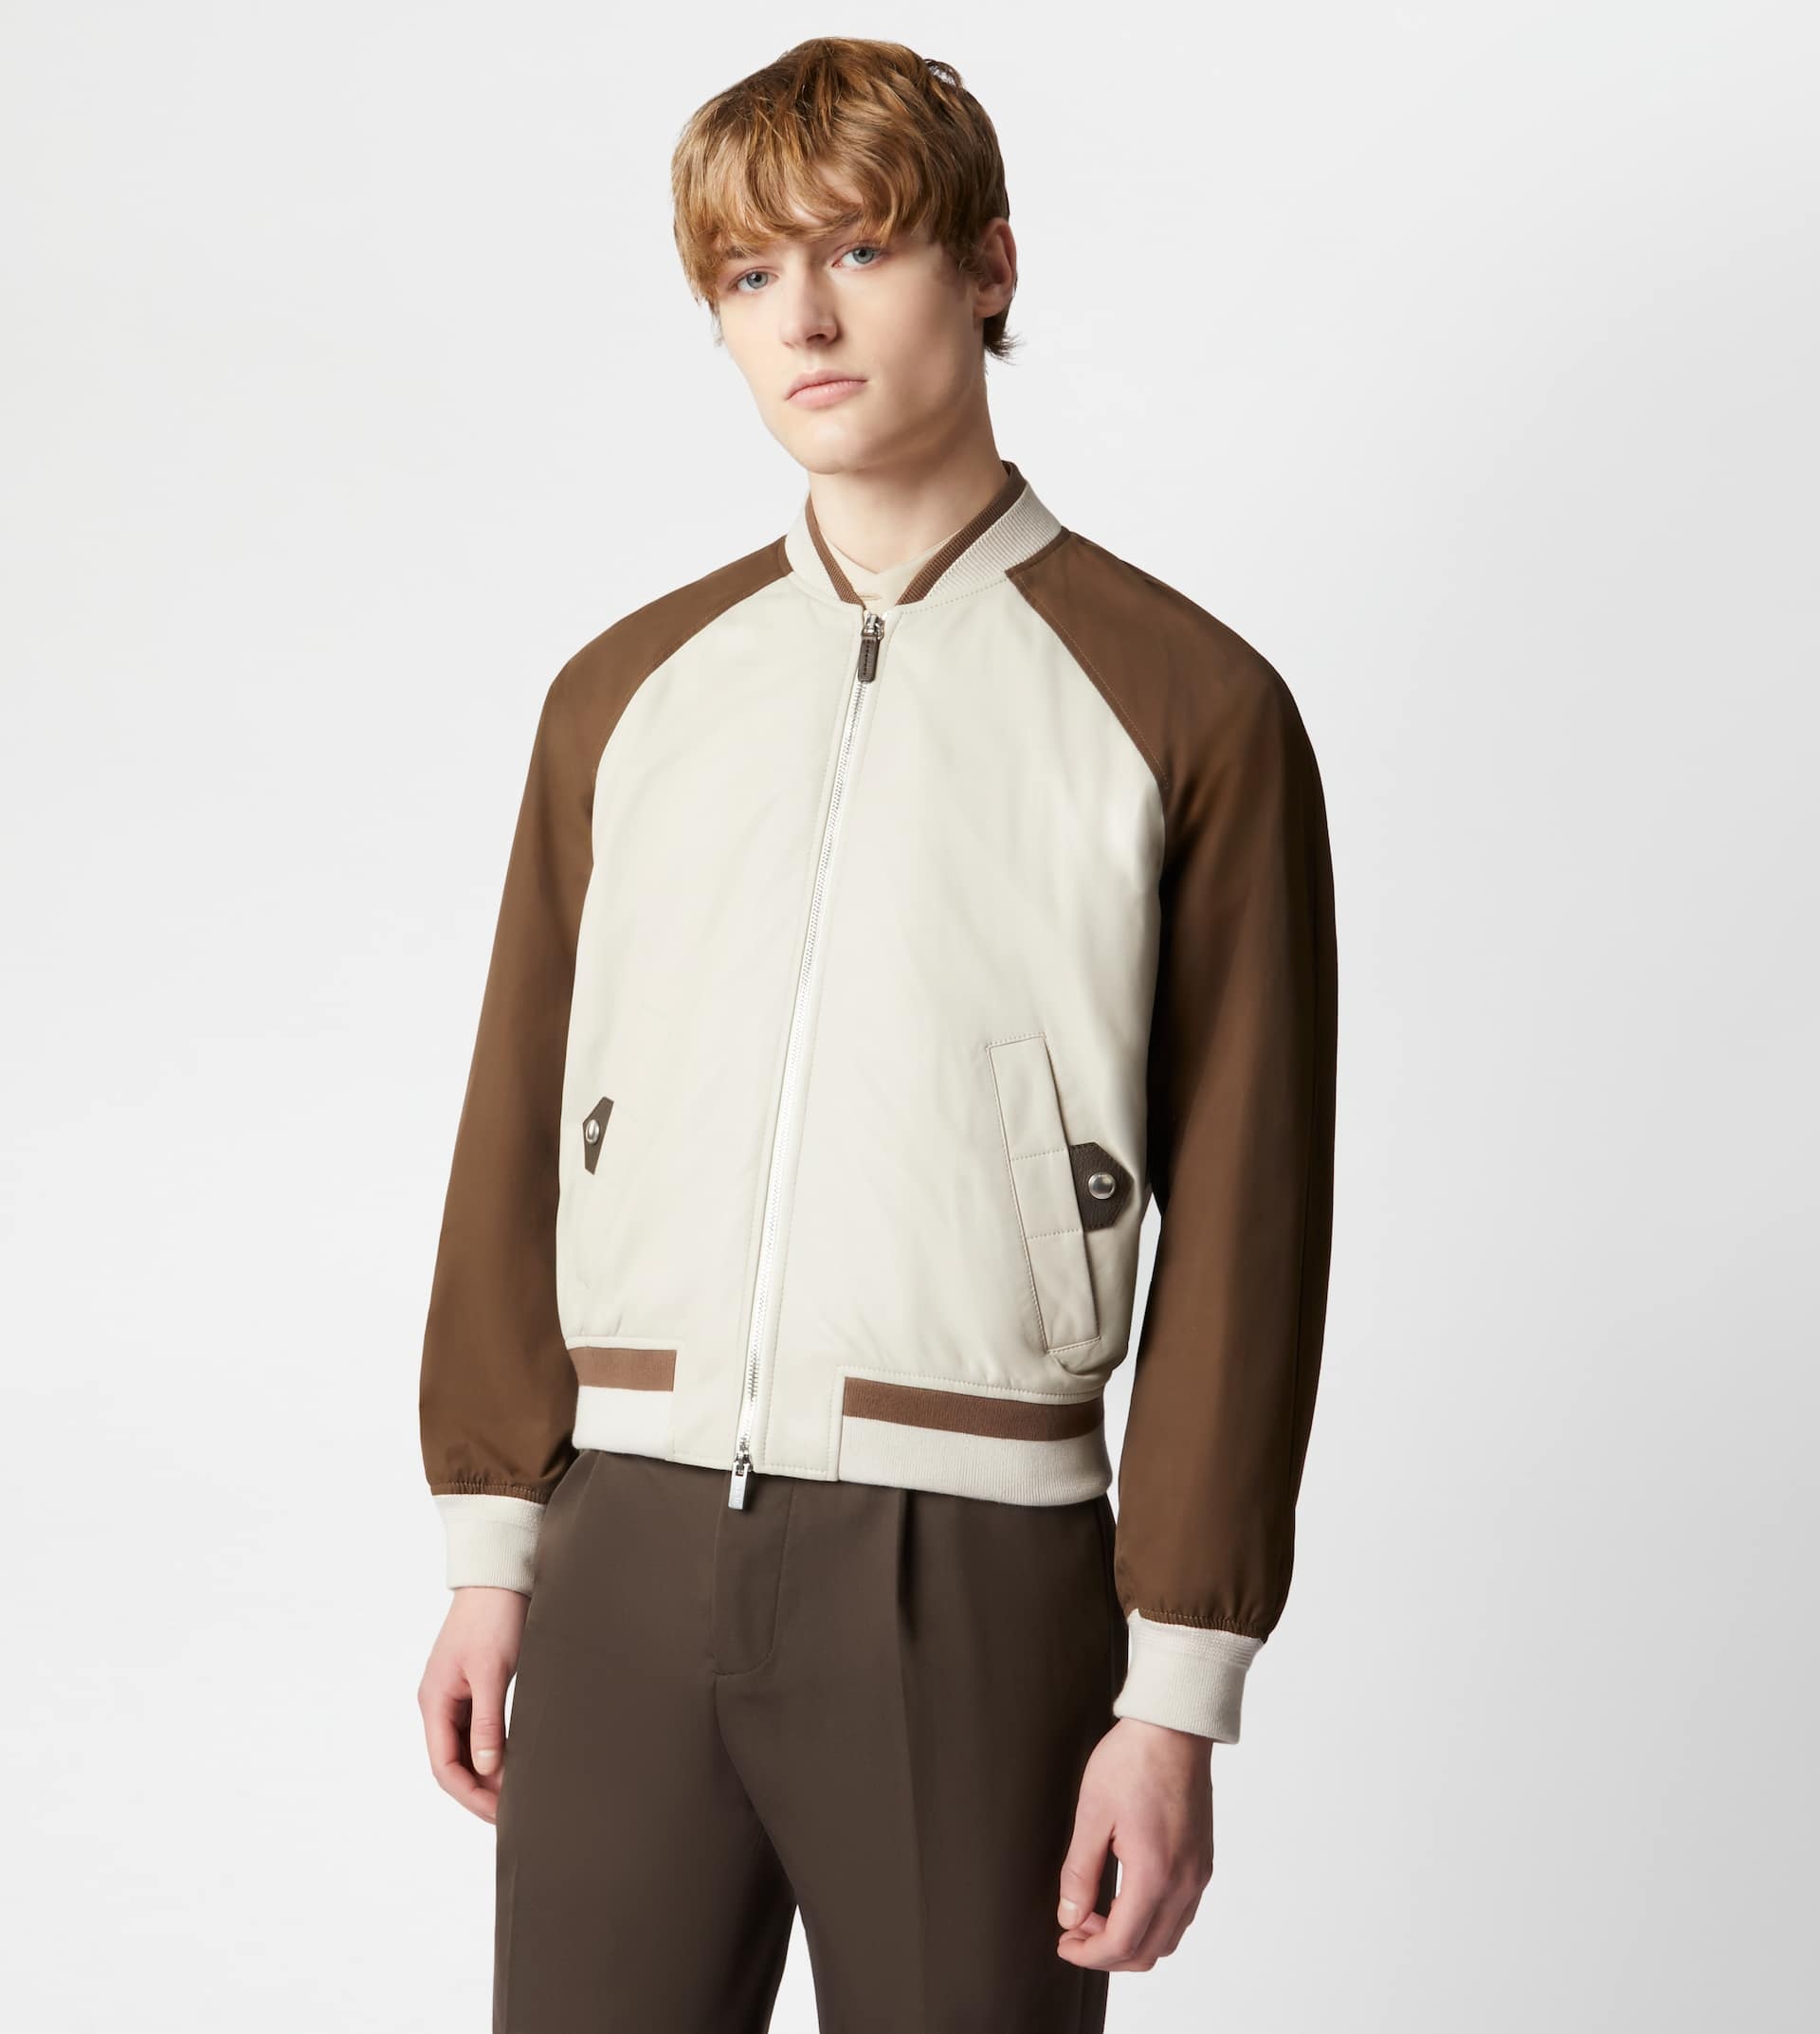 BOMBER JACKET IN LEATHER - BROWN, OFF WHITE - 6